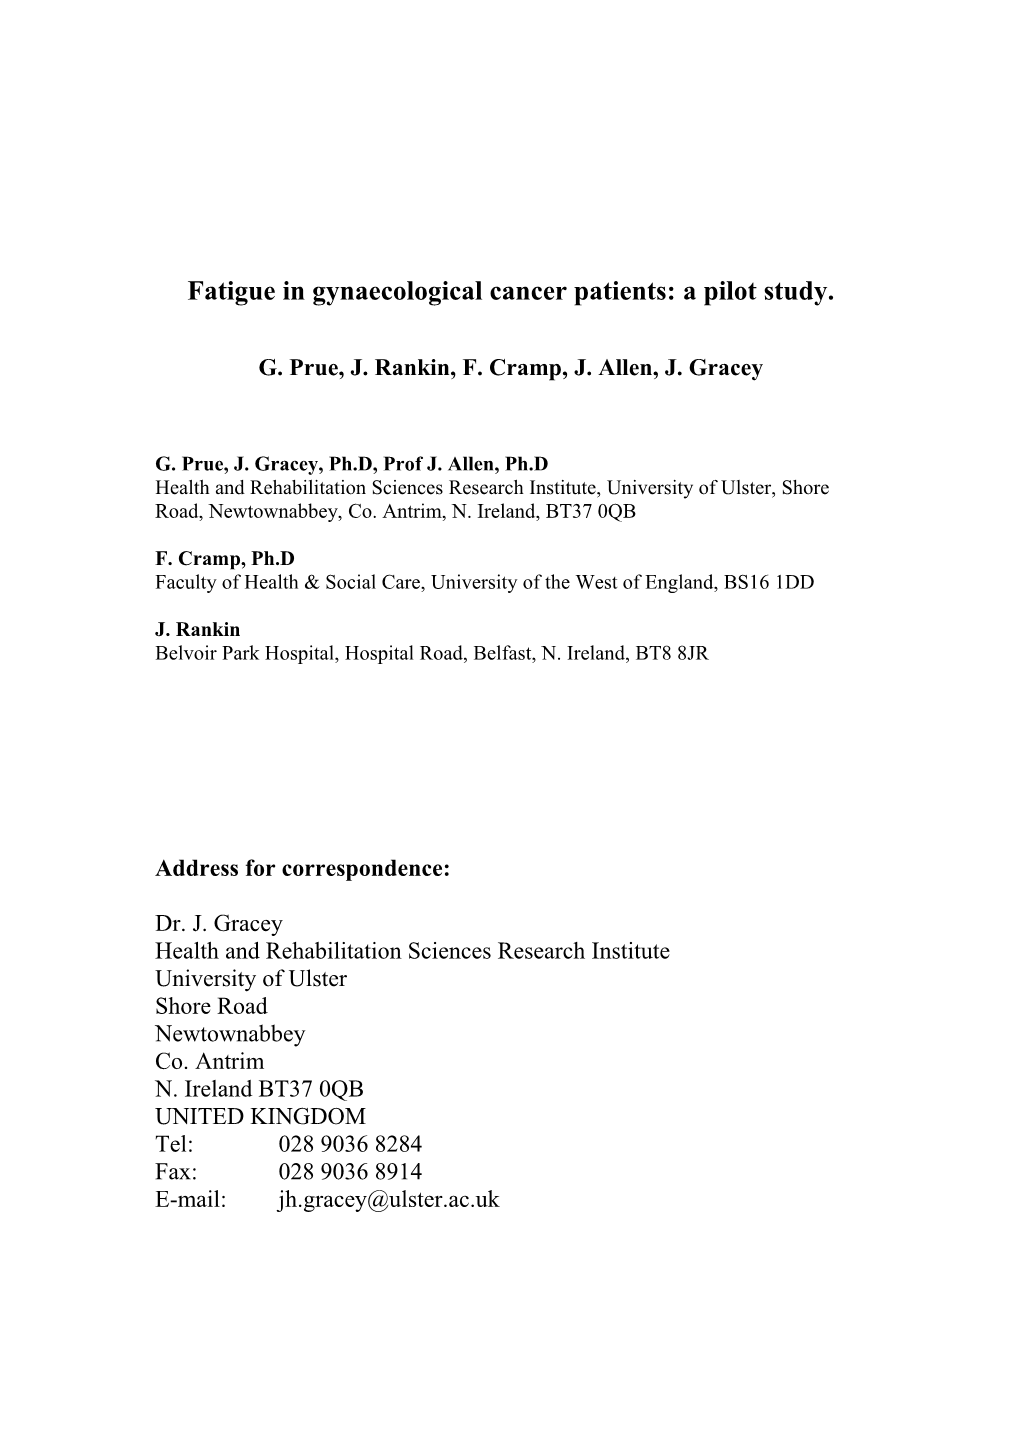 Fatigue in Gynaecological Cancer Patients: a Pilot Study